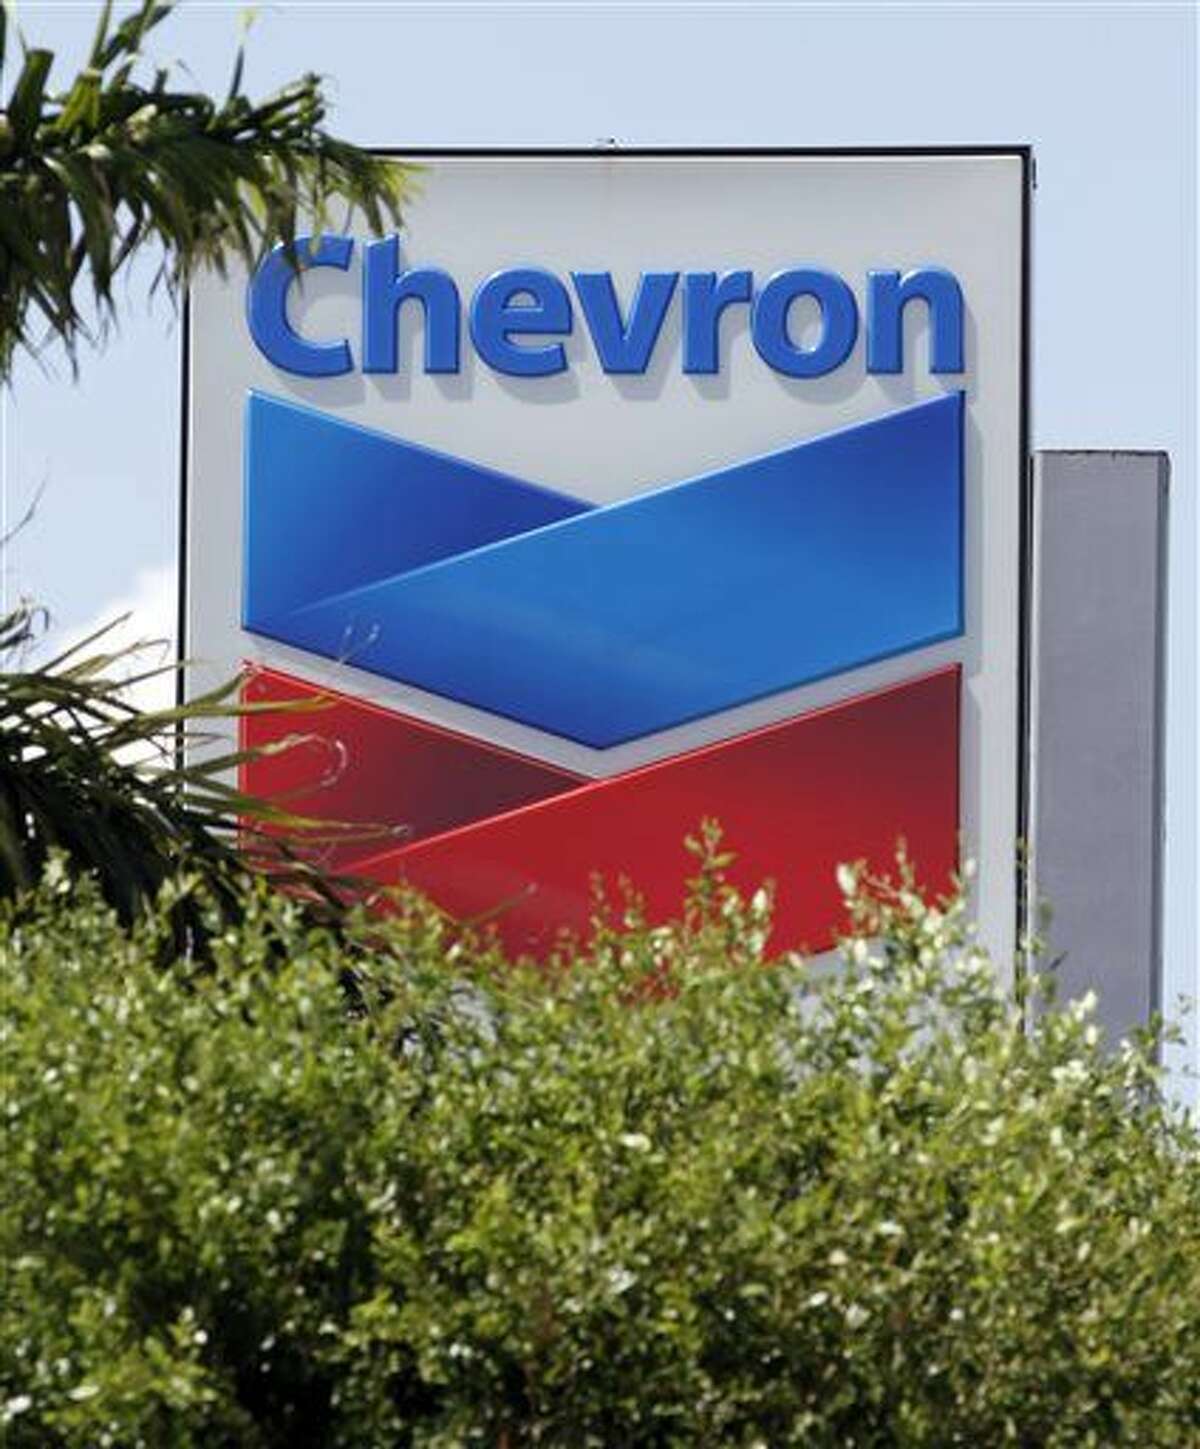 FILE - This Aug. 20, 2012 photo shows a Chevron sign in Miami. Chevron Corp. is cutting up to 7,000 jobs as it deals with lower oil prices that are cutting deeply into profit. The company said Friday, Oct. 30, 2015 that it would cut capital and exploratory spending next year by one-fourth, with further cuts in 2017 and 2018 depending on the oil industry's condition then. (AP Photo/Alan Diaz)